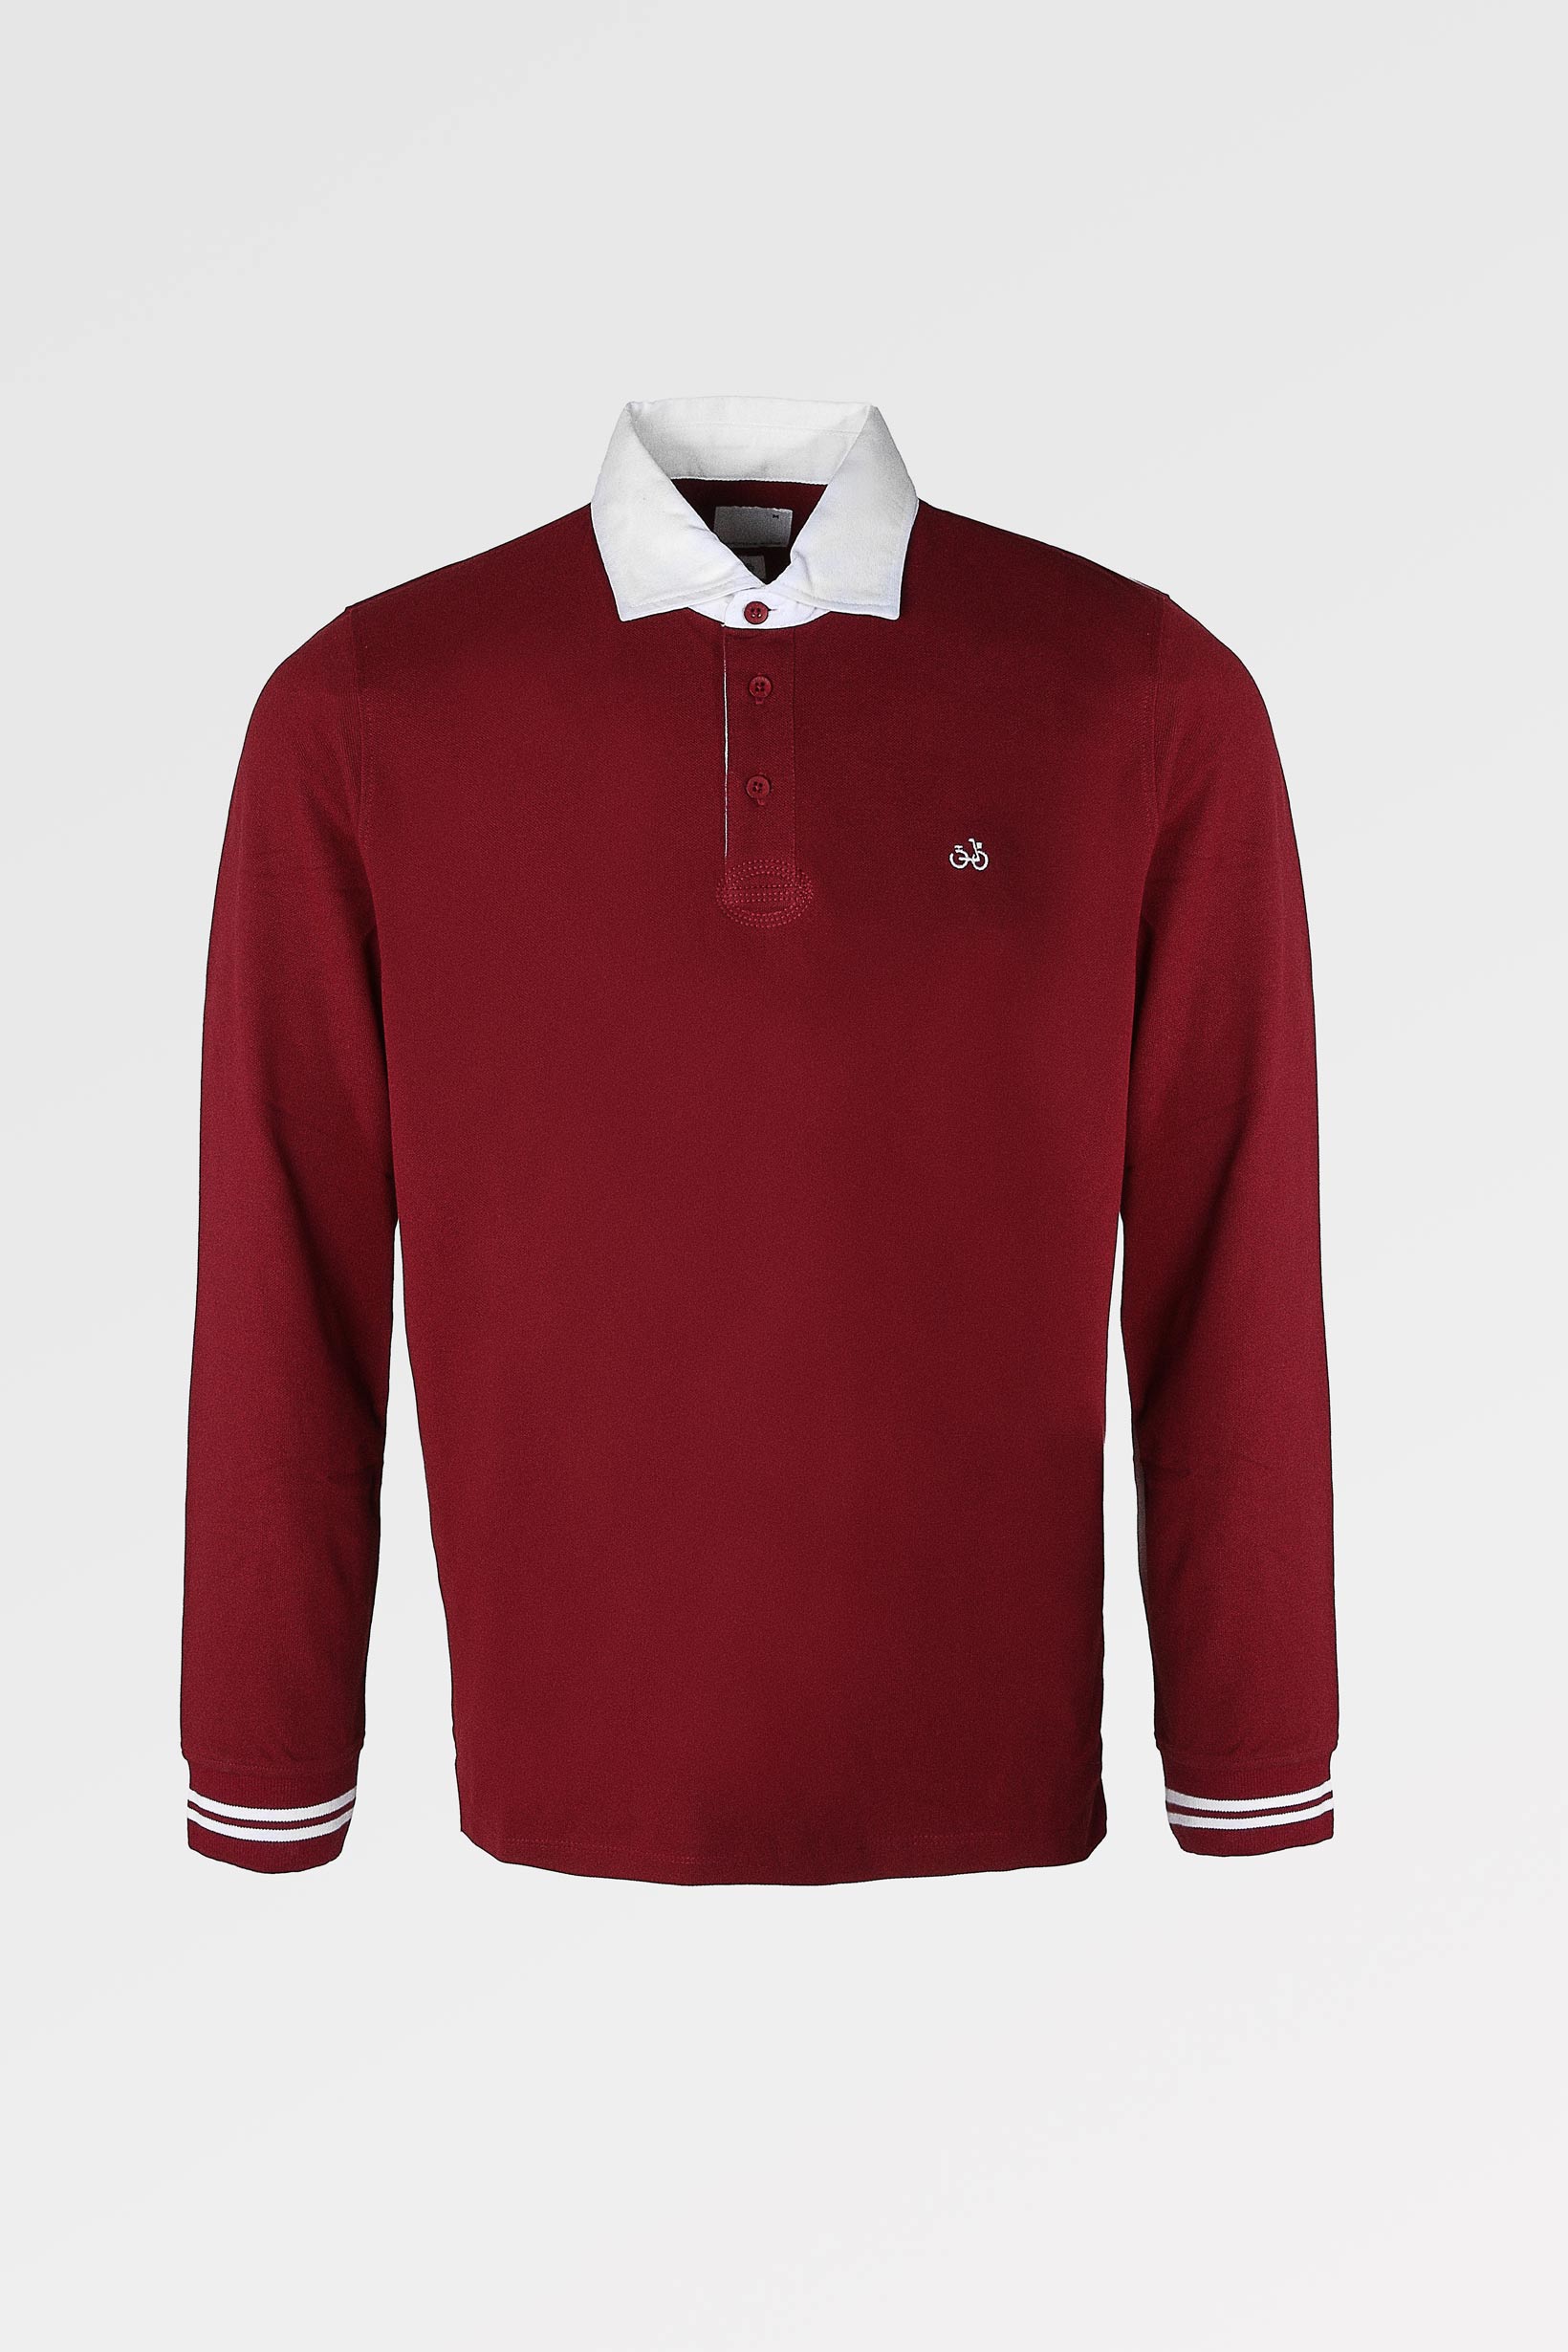 Polo Rugby Bordeaux Sport Man